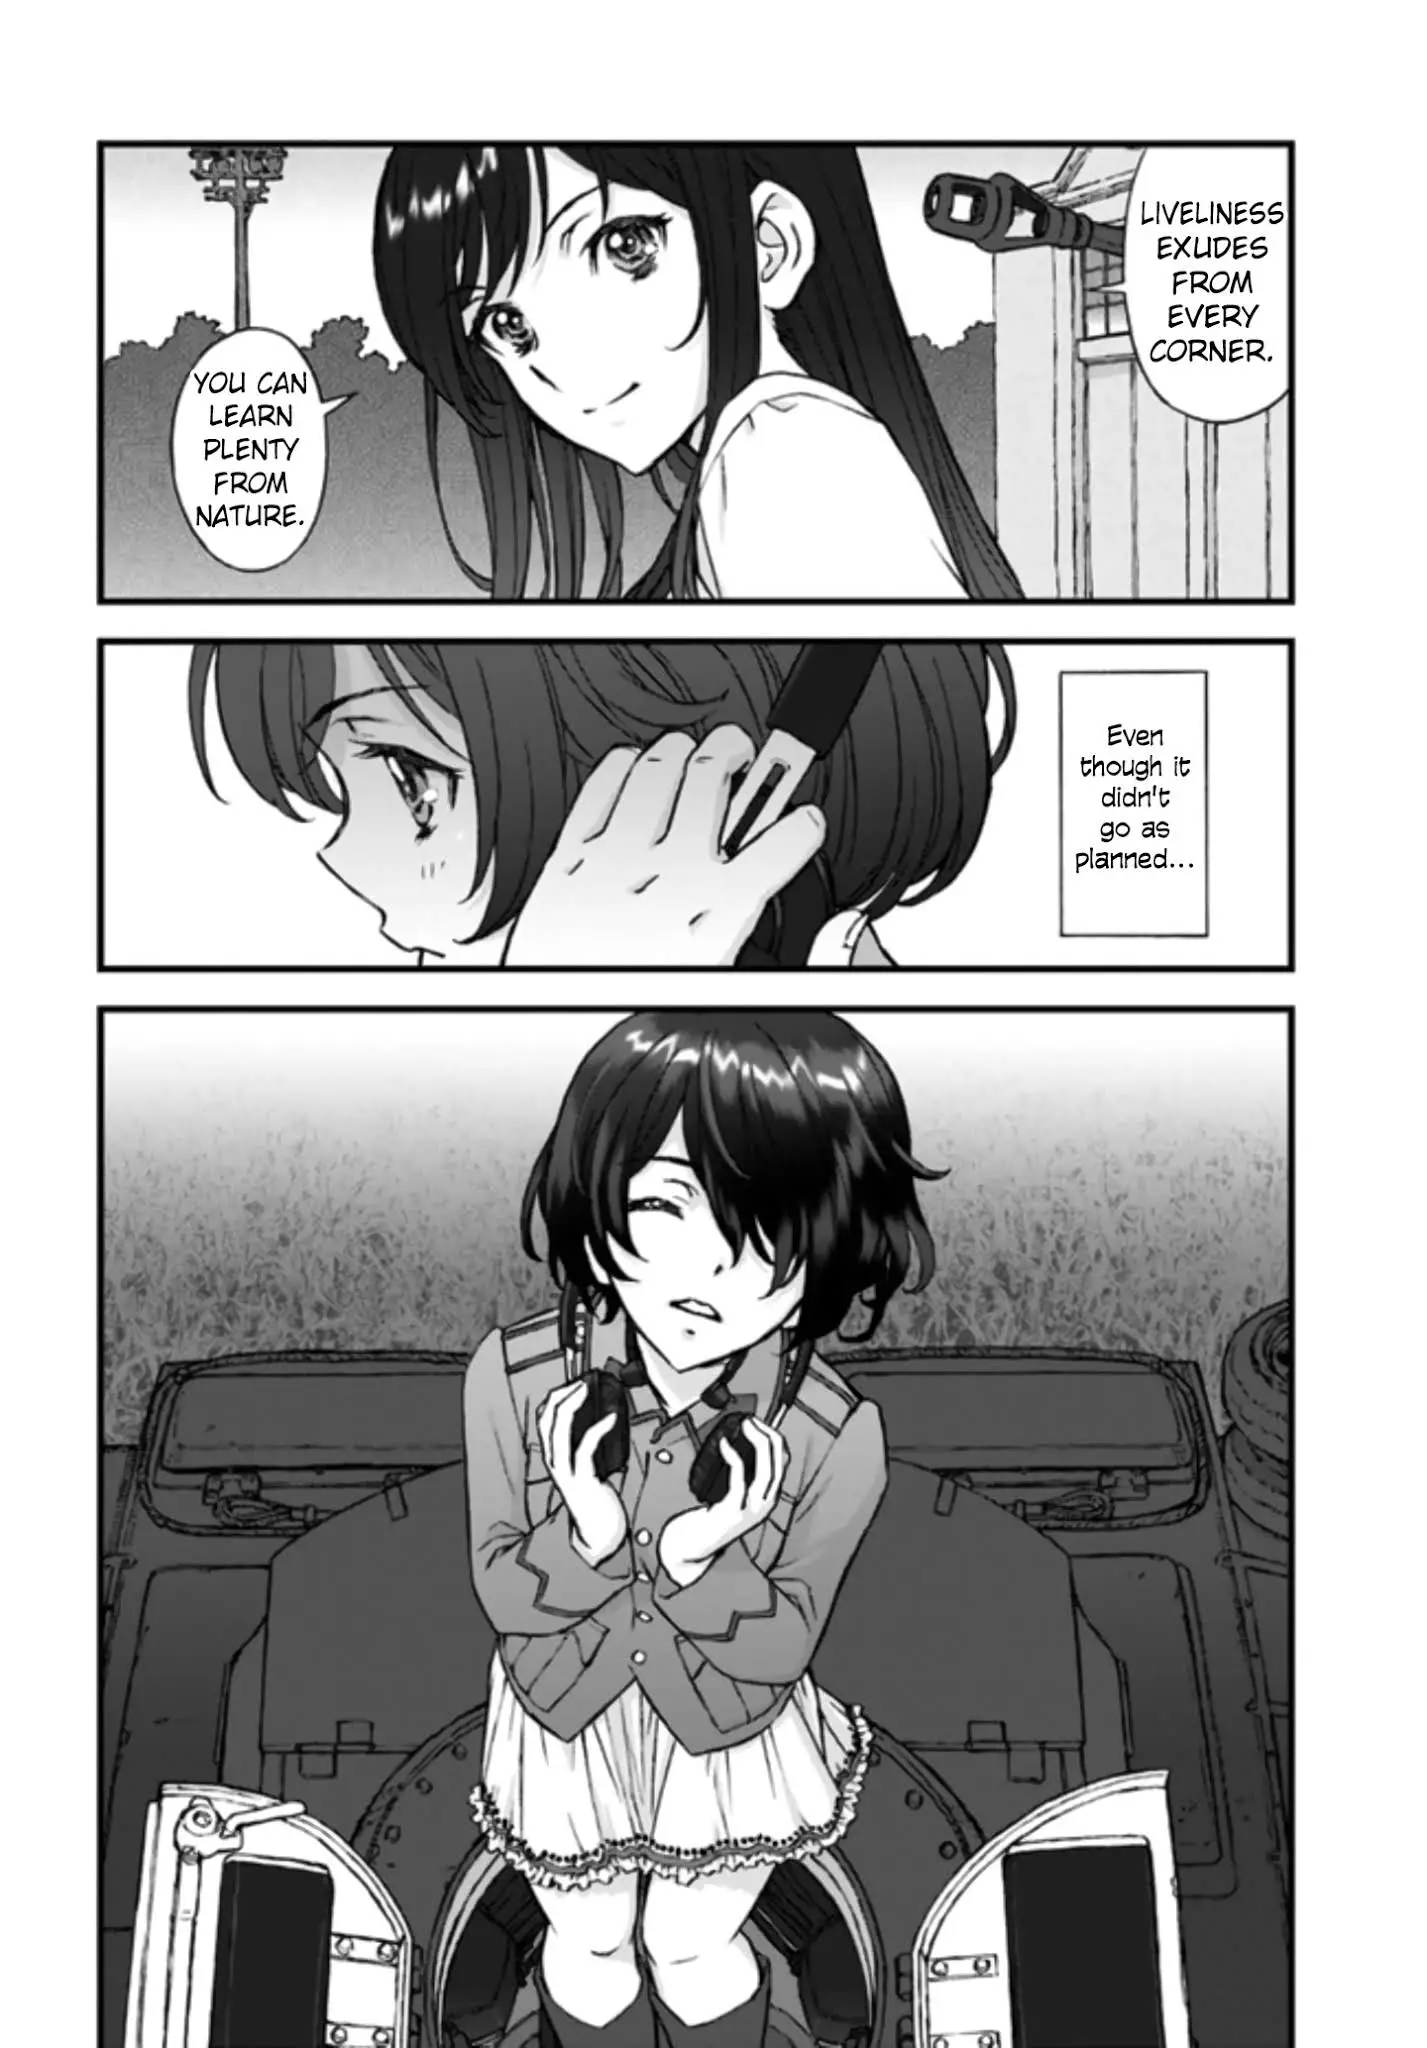 Girls Und Panzer - The Fir Tree And The Iron-Winged Witch - 4 page 2